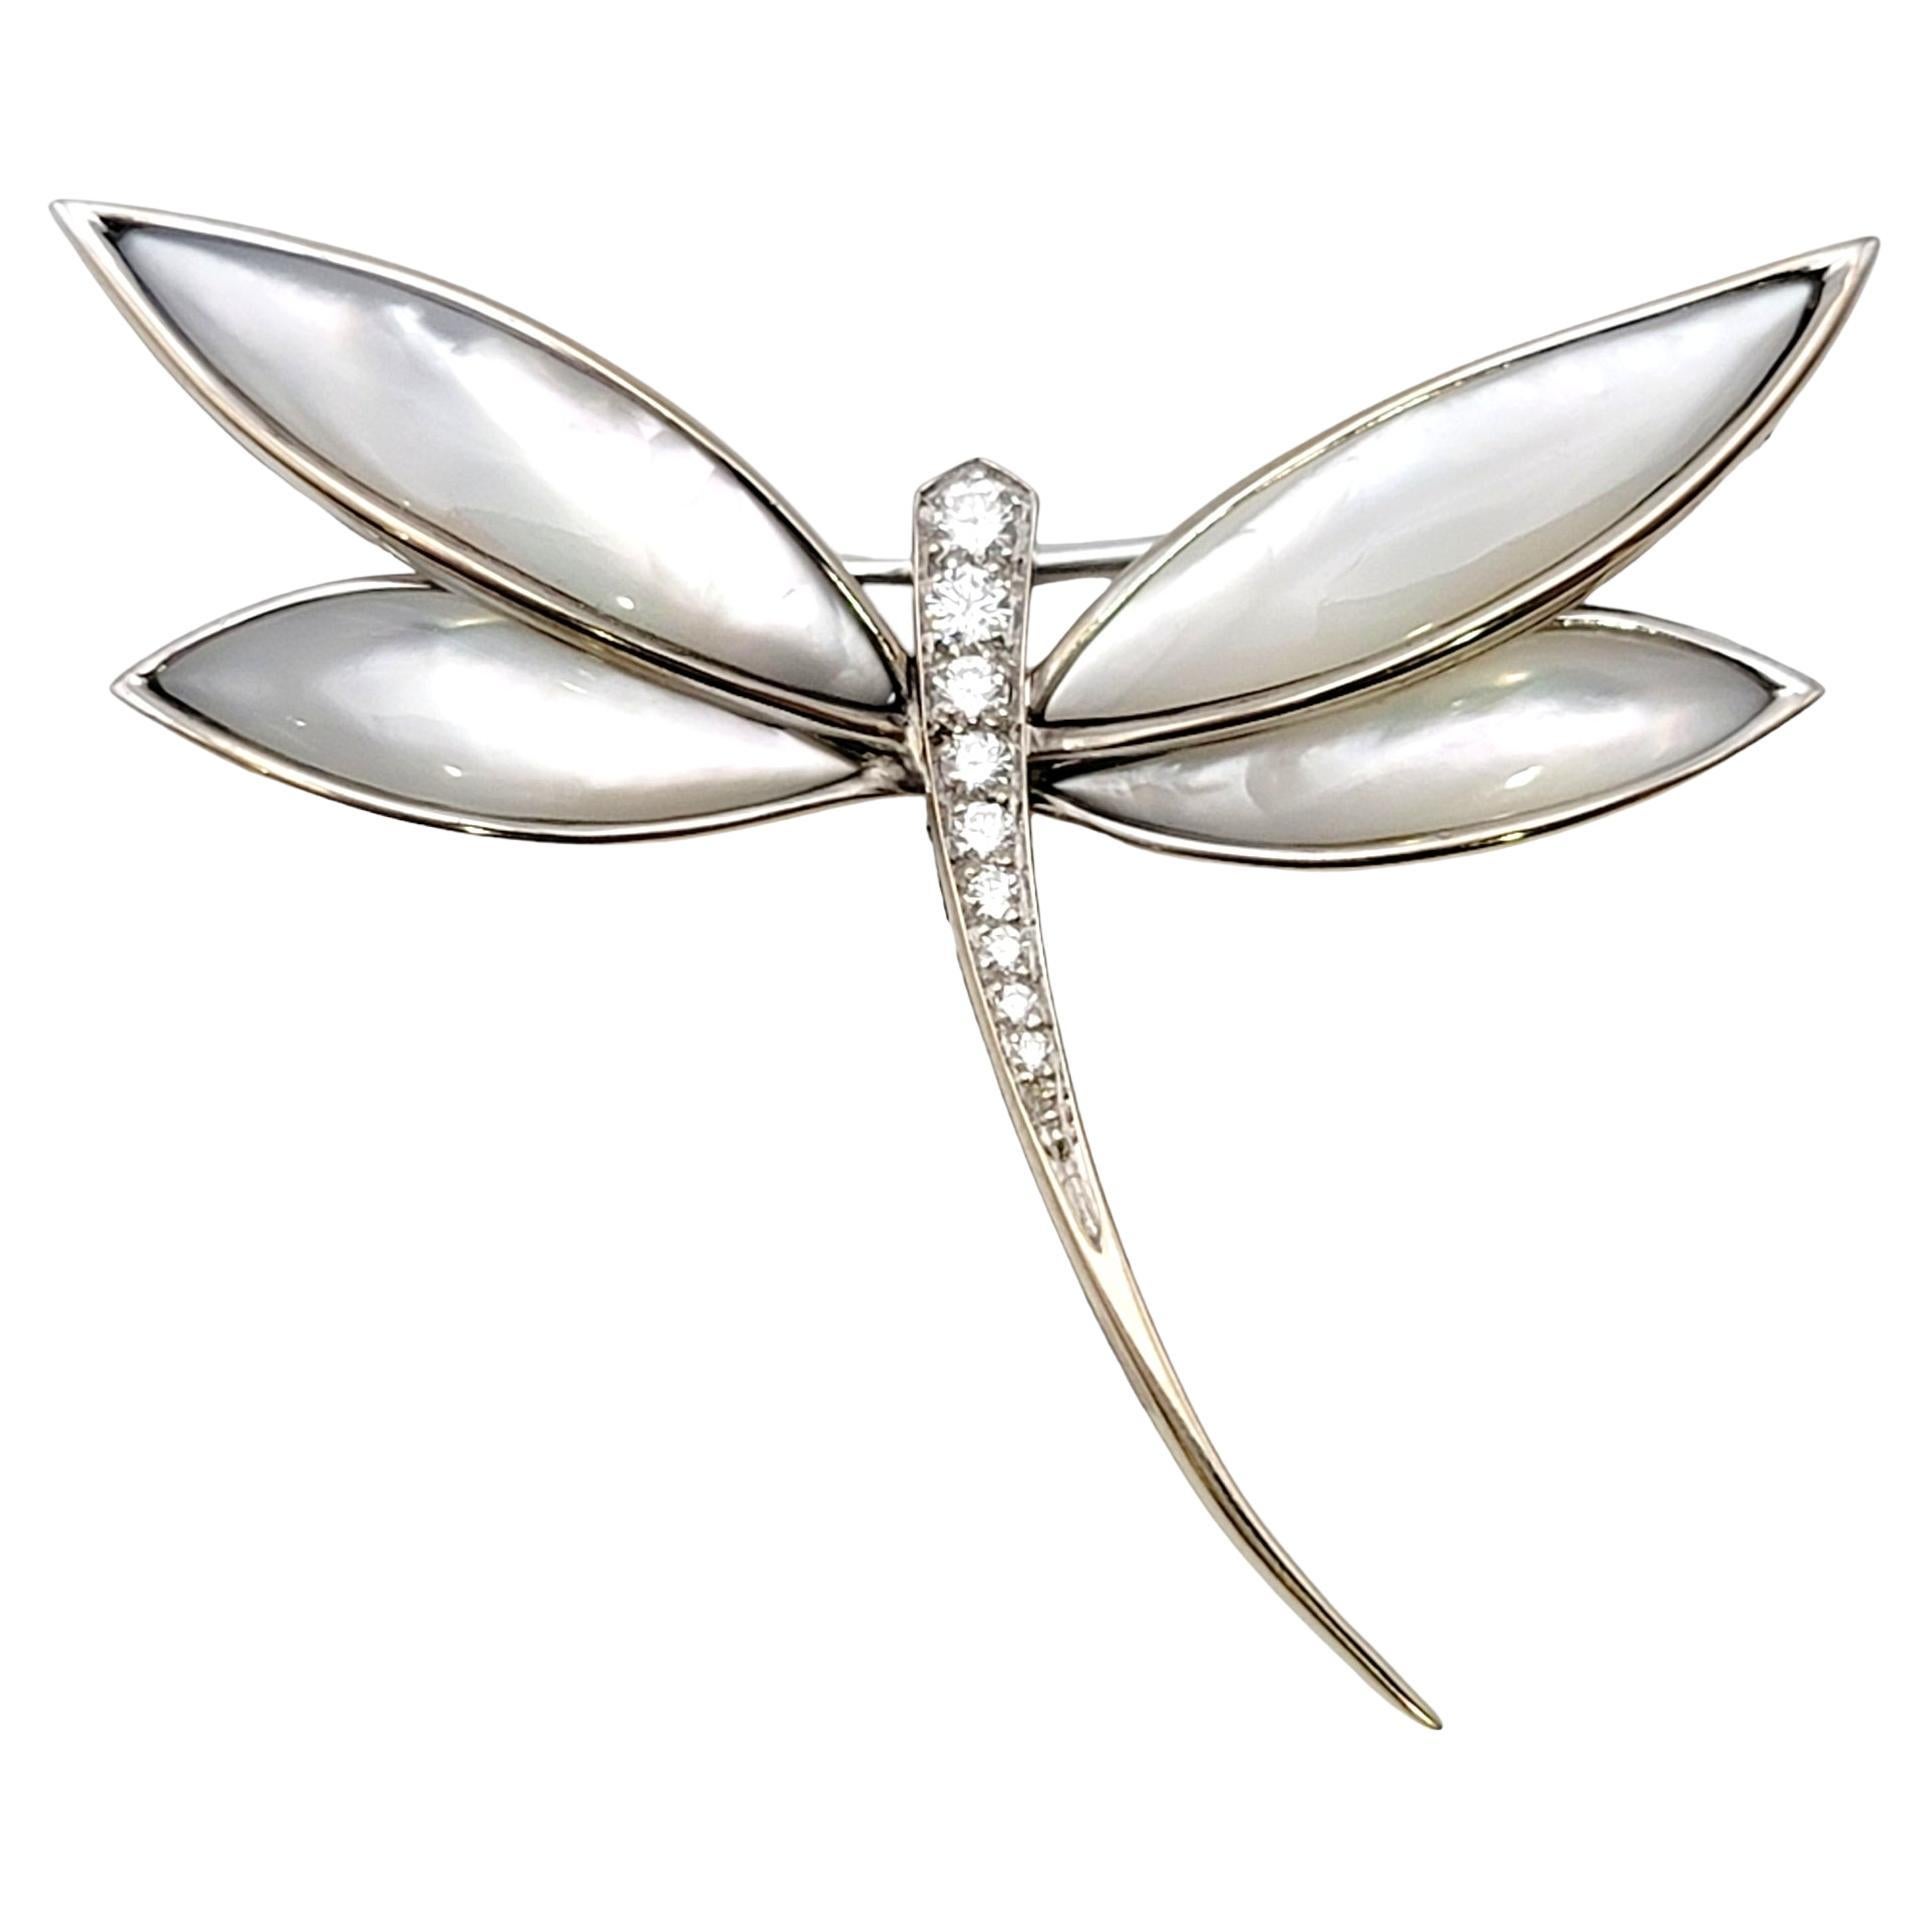 Contemporary Van Cleef & Arpels Diamond and Mother of Pearl Dragonfly Brooch in 18 Karat Gold